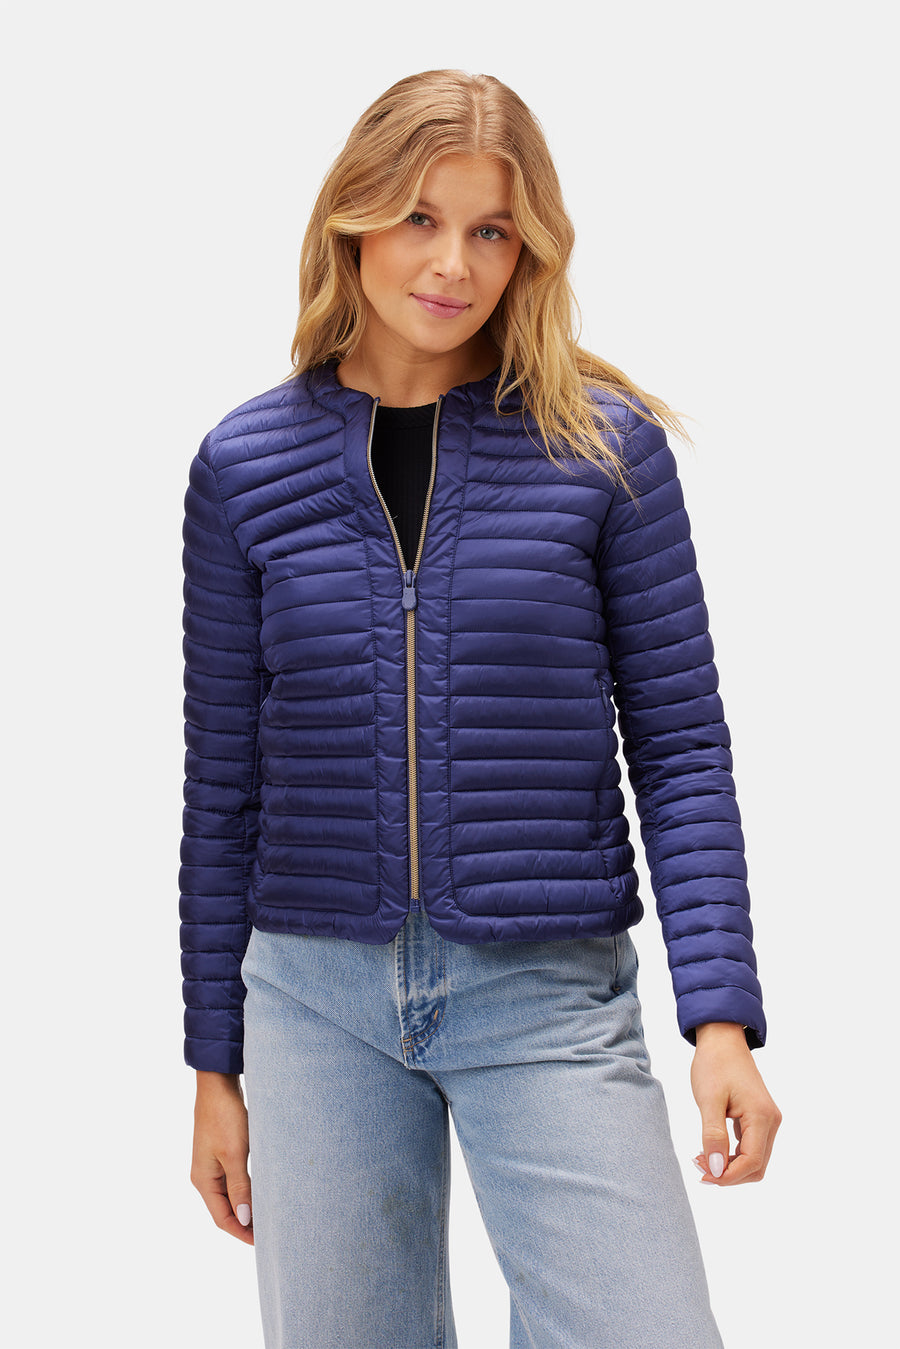 Save The Duck Carina Puffer Jacket - Navy Blue